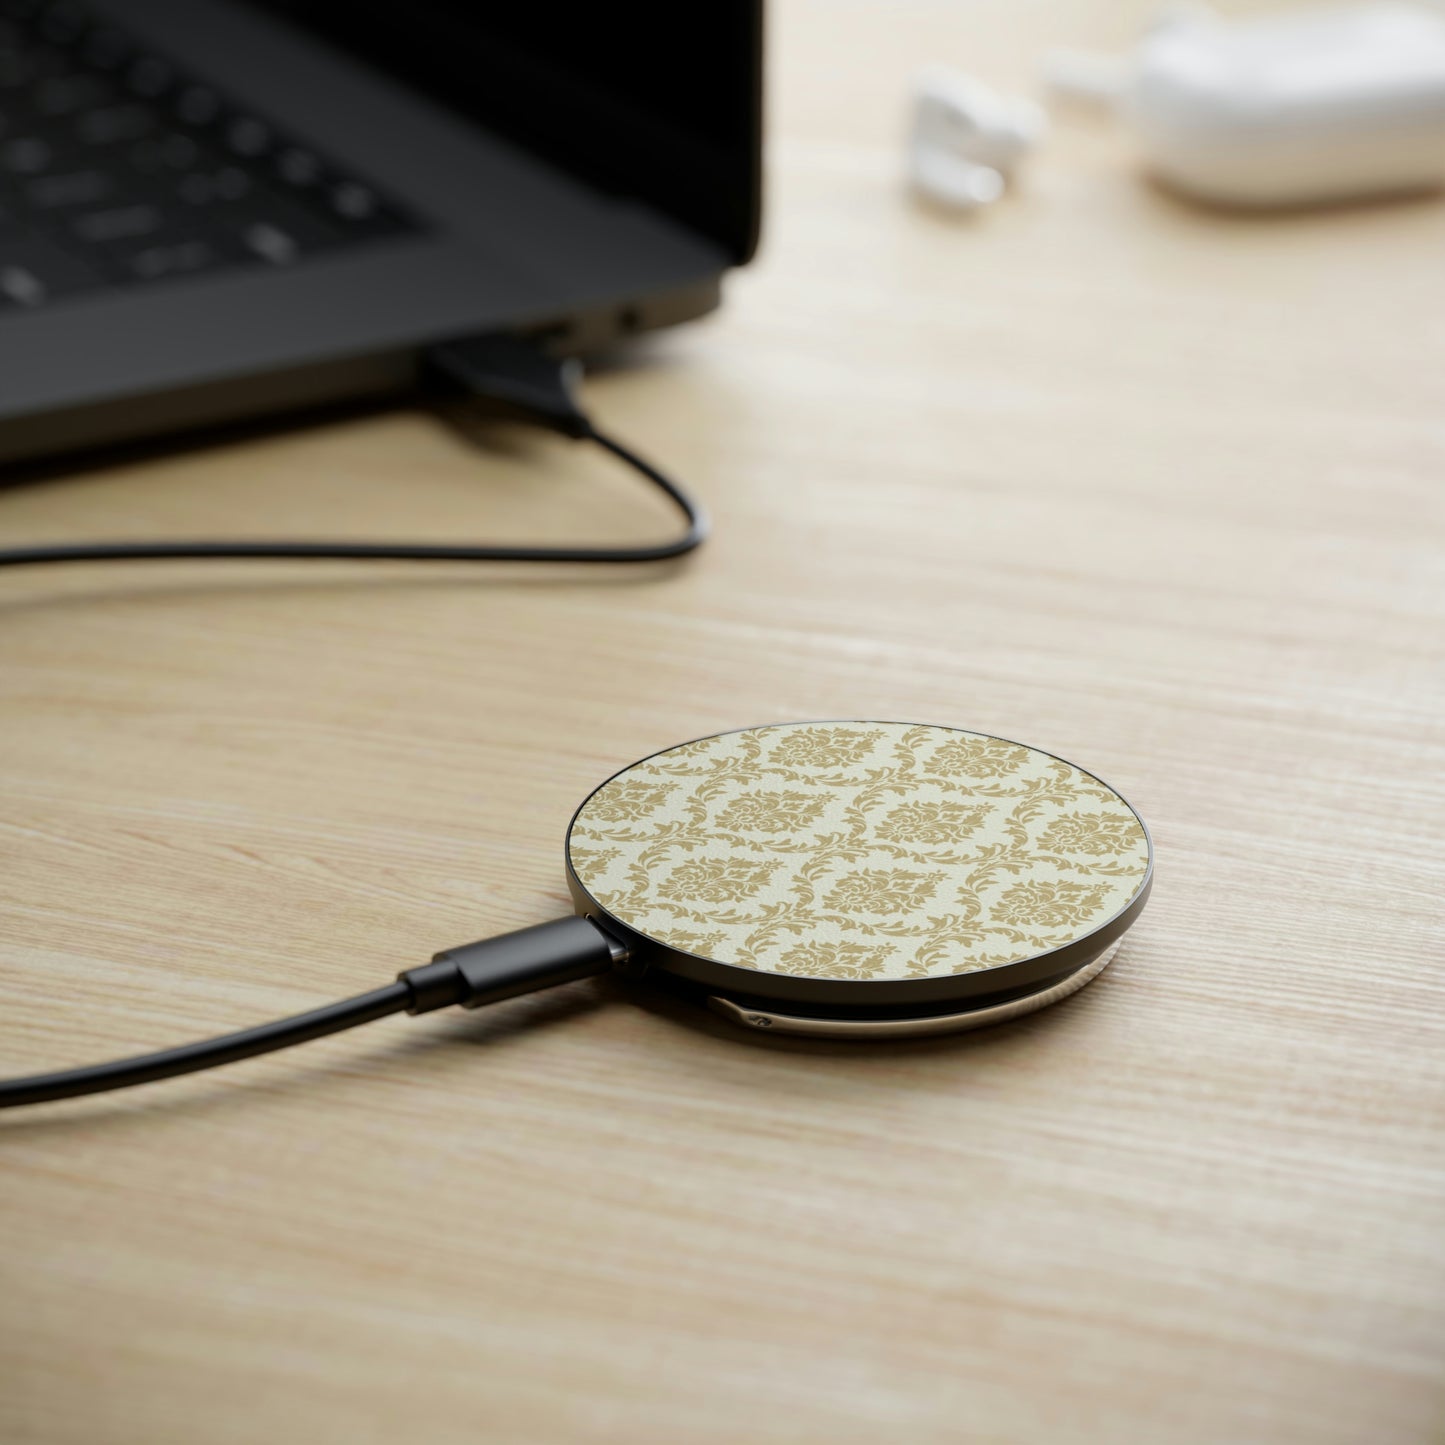 Beige Damask Magnetic Induction Charger